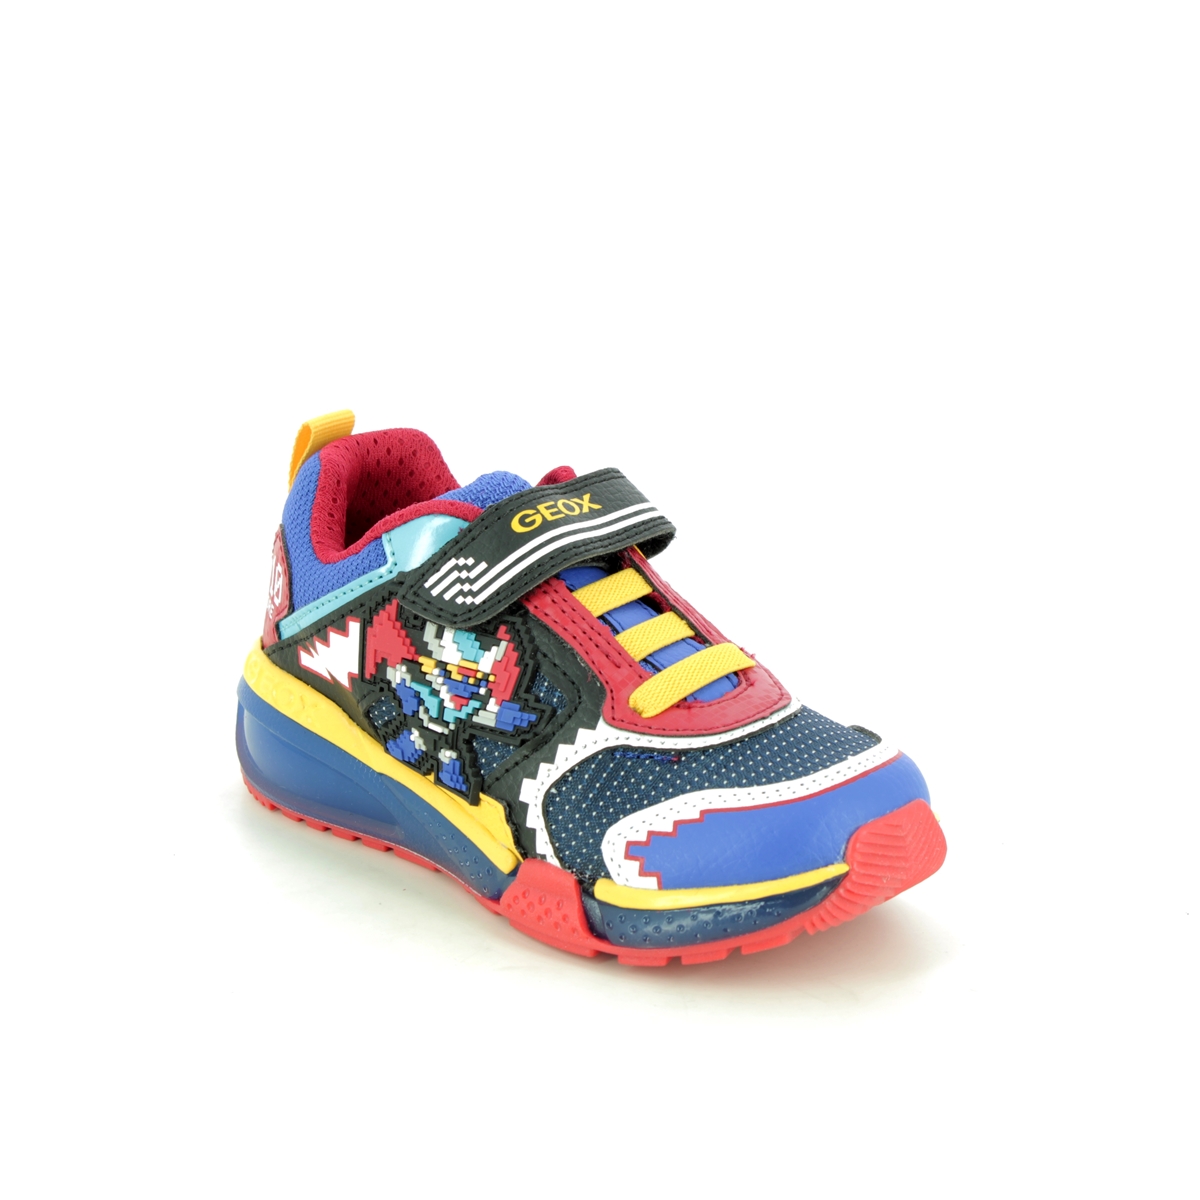 Geox - Super Mario Bungee (Navy Red) J26Fea-C0833 In Size 32 In Plain Navy Red For kids